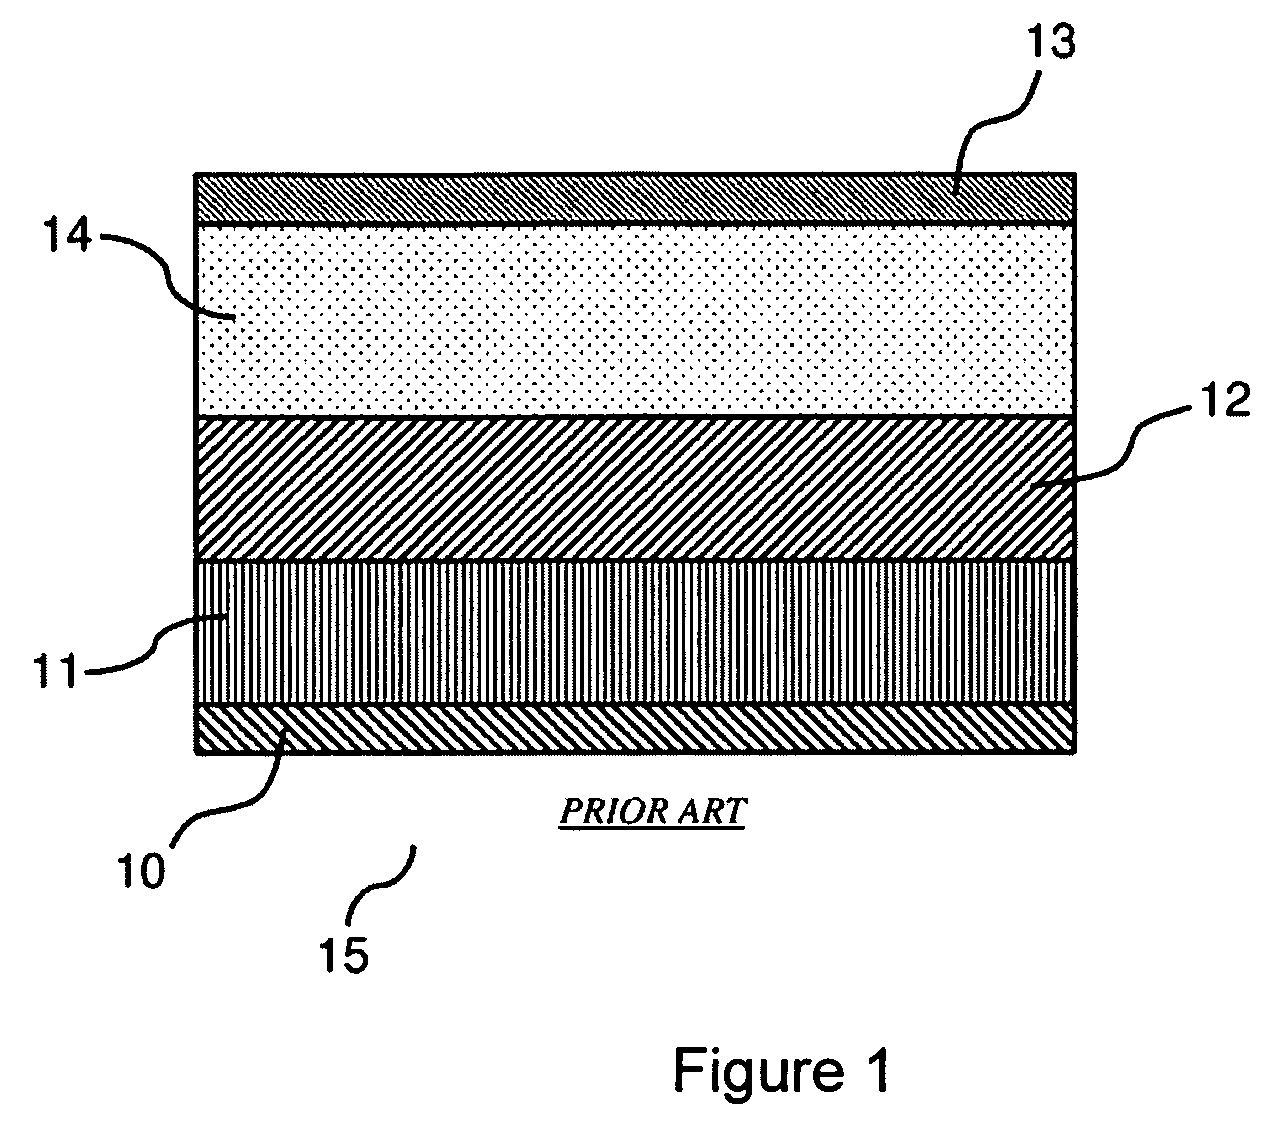 Anode material having a uniform metal-semiconductor alloy layer